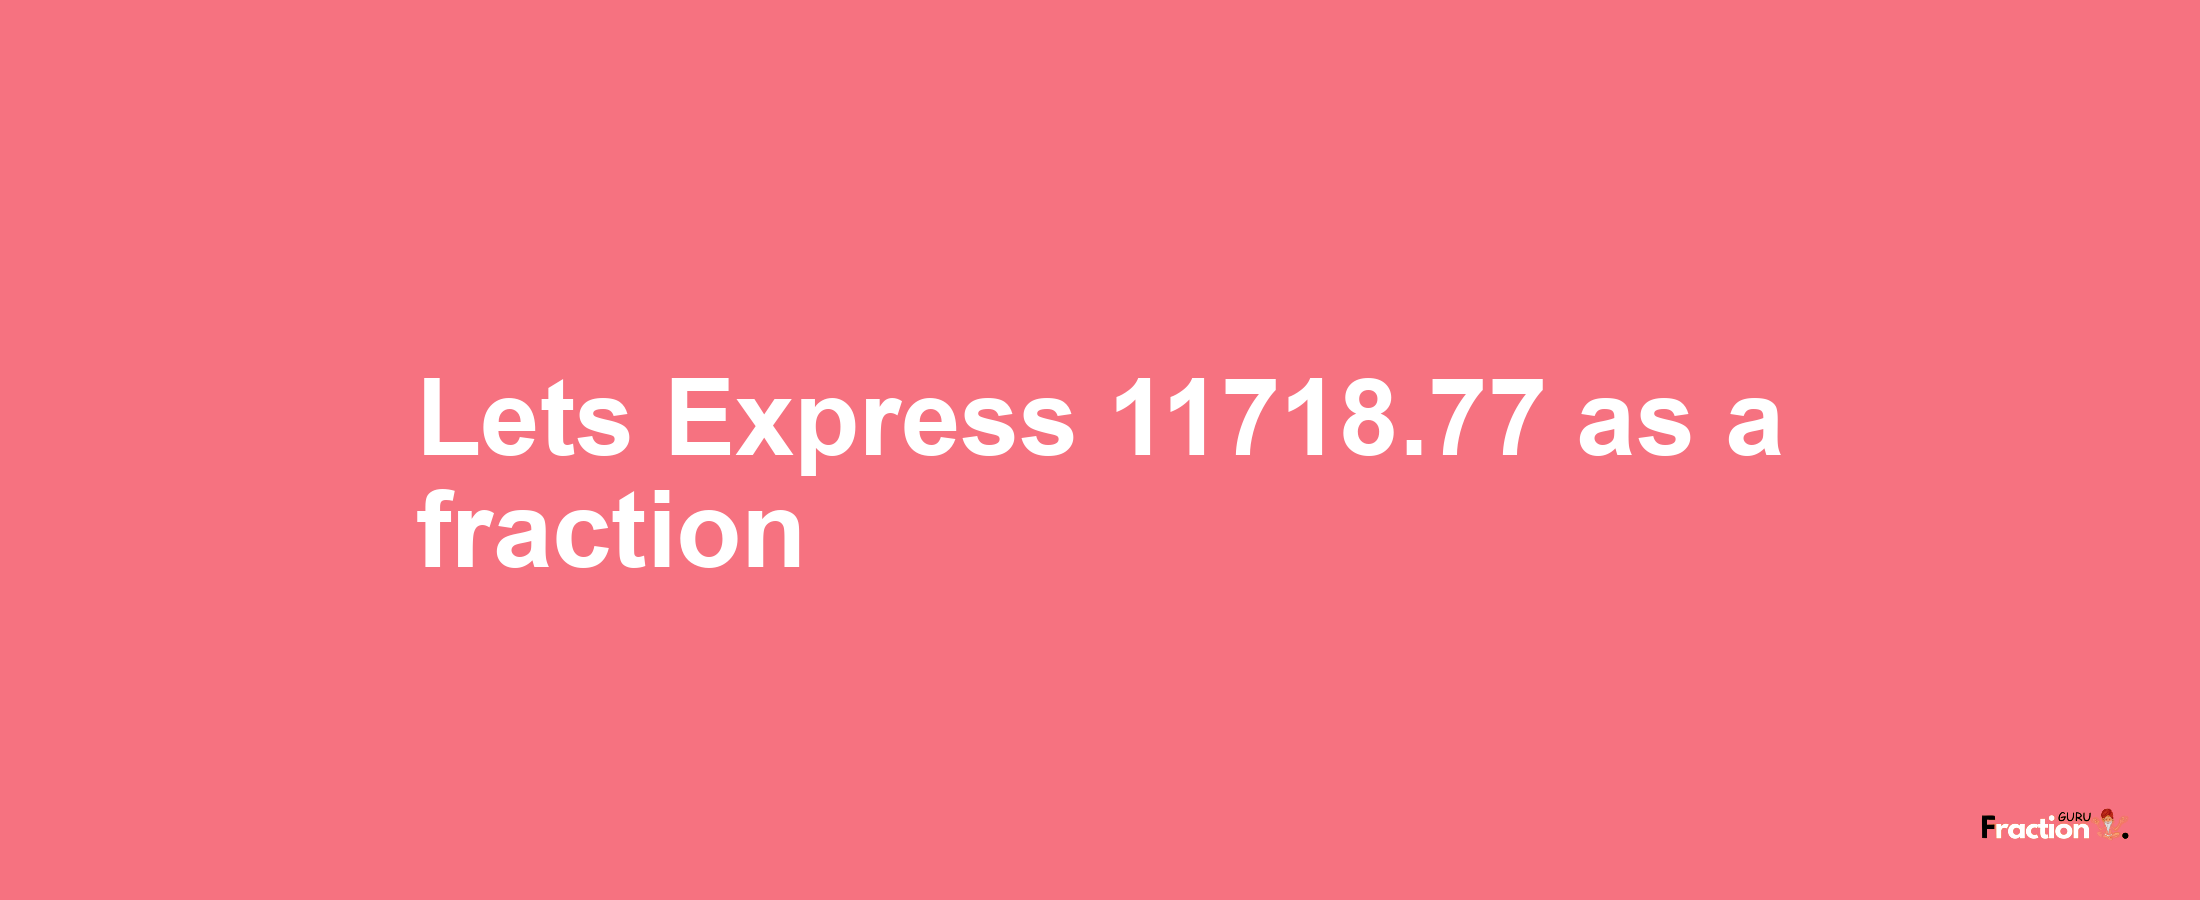 Lets Express 11718.77 as afraction